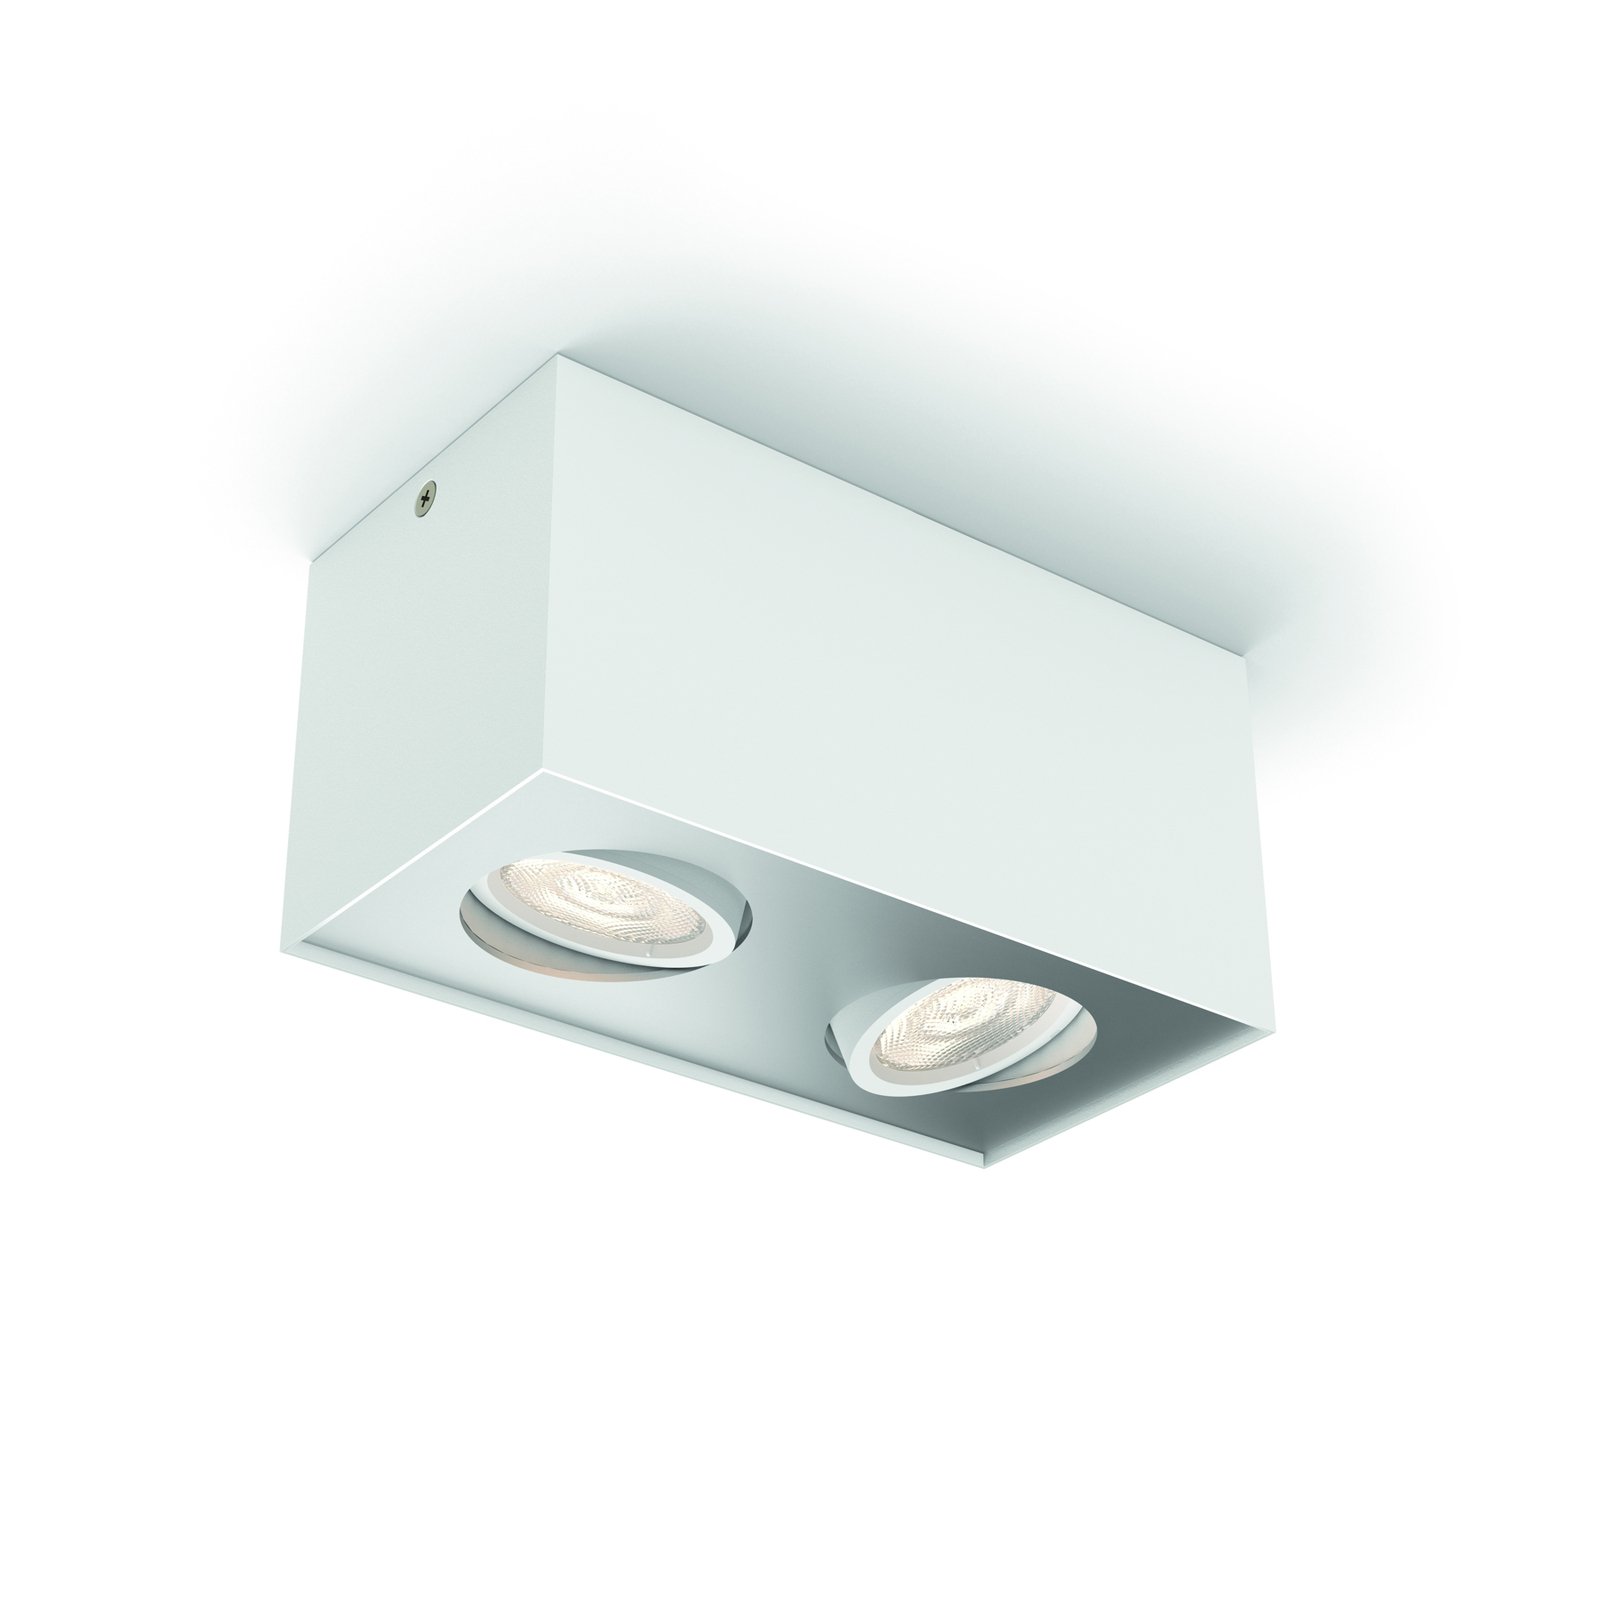 Philips myLiving Box LED spot 2-lamps wit